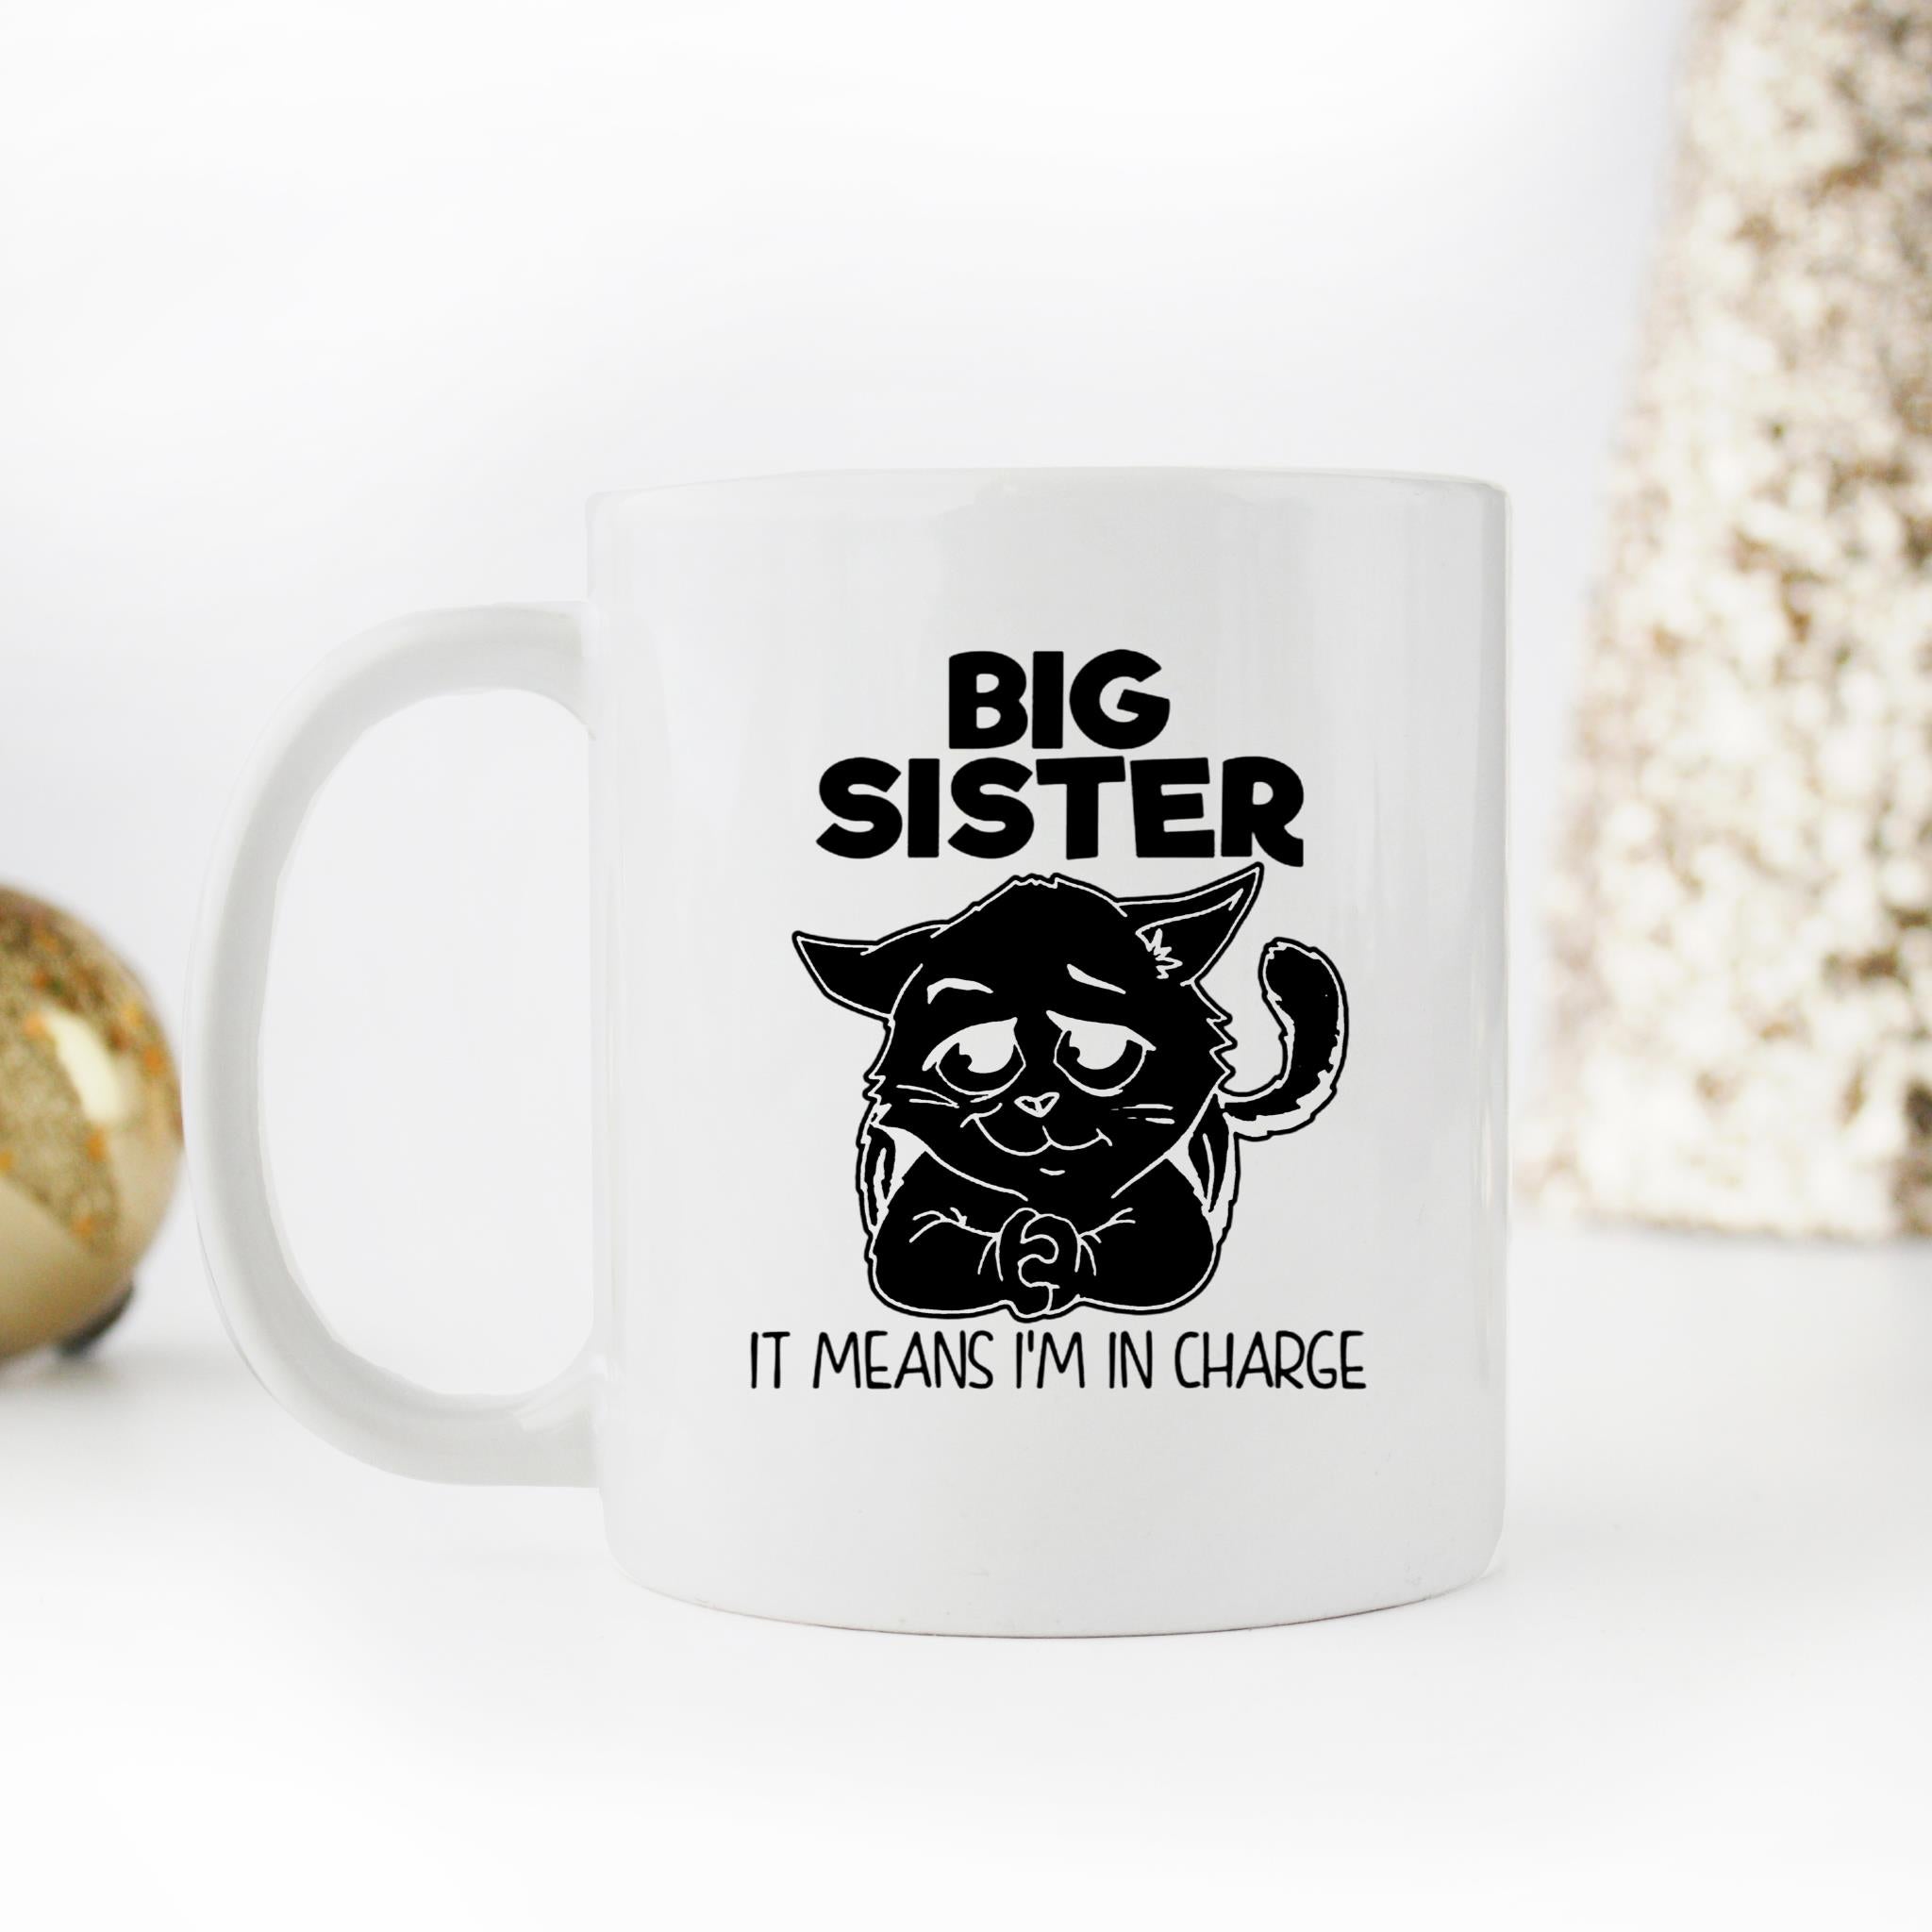 Skitongifts Funny Ceramic Novelty Coffee Mug Big Sister,It Means Im In Charge Cat Lover RsZXjKE